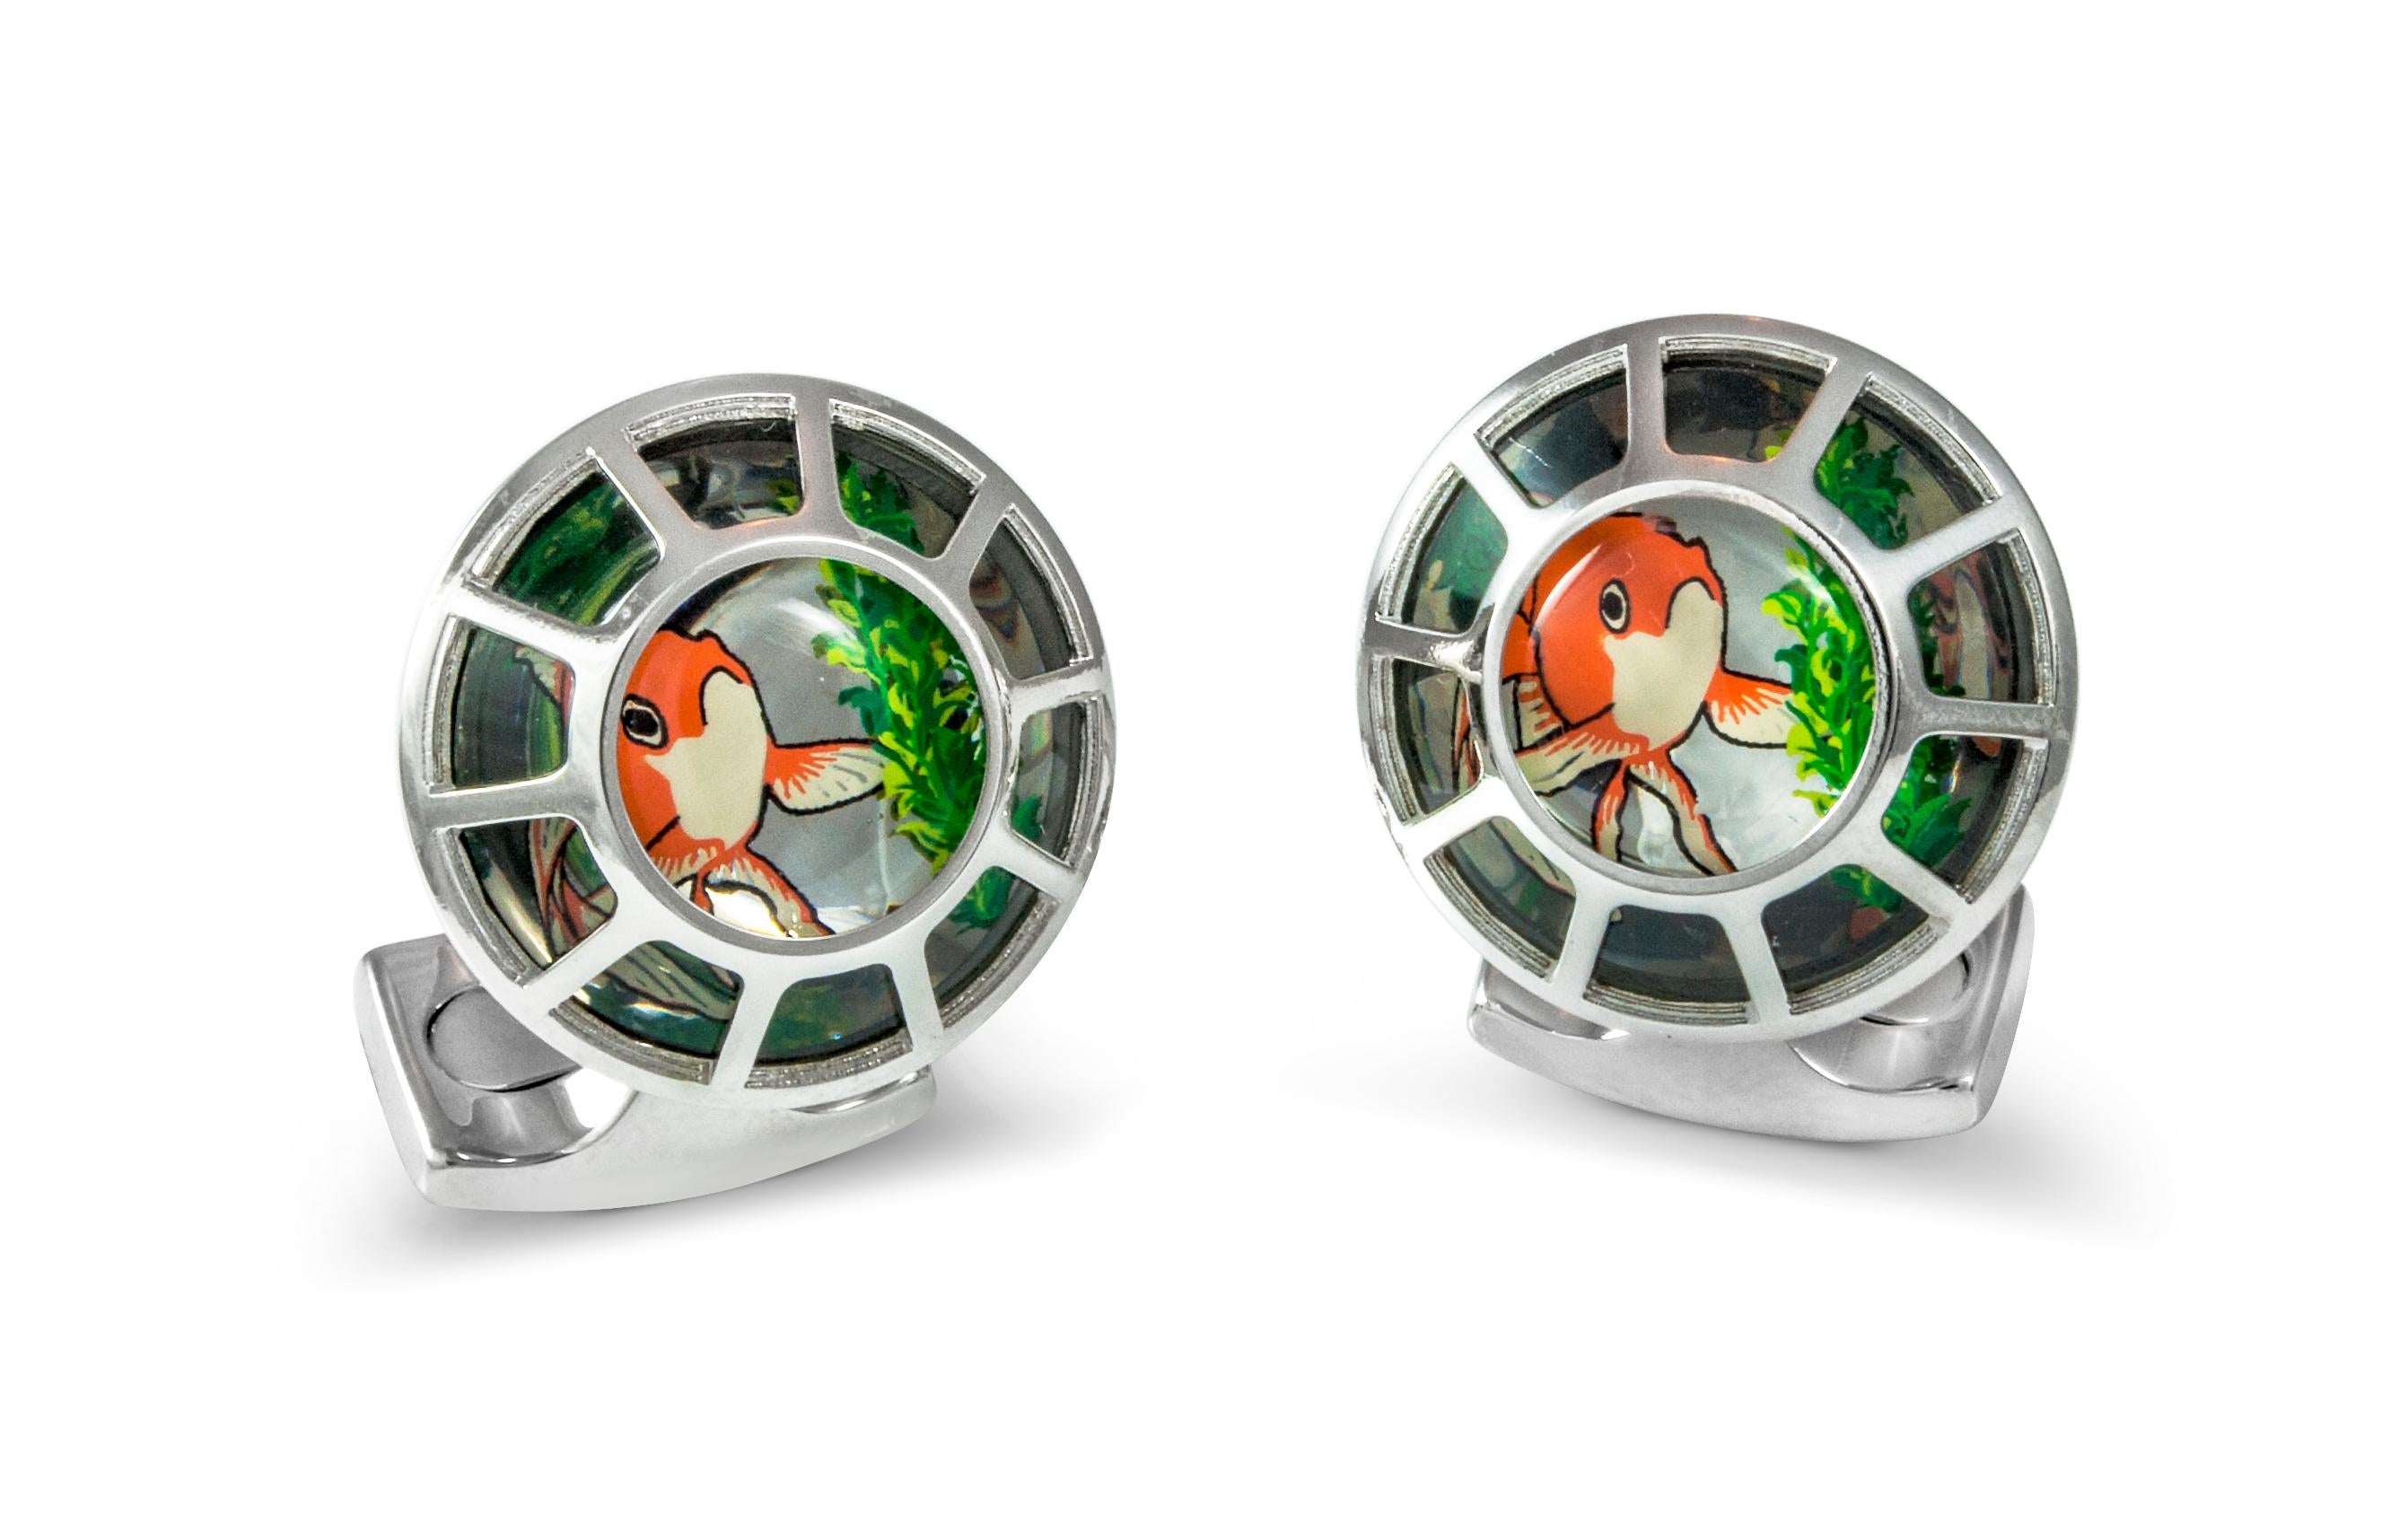 DEAKIN & FRANCIS, Piccadilly Arcade, London

This beautiful and fun gift set is perfect for sky and sea lovers. From a submarine porthole to a rocket porthole, these 2 cufflinks make a quirky gift.